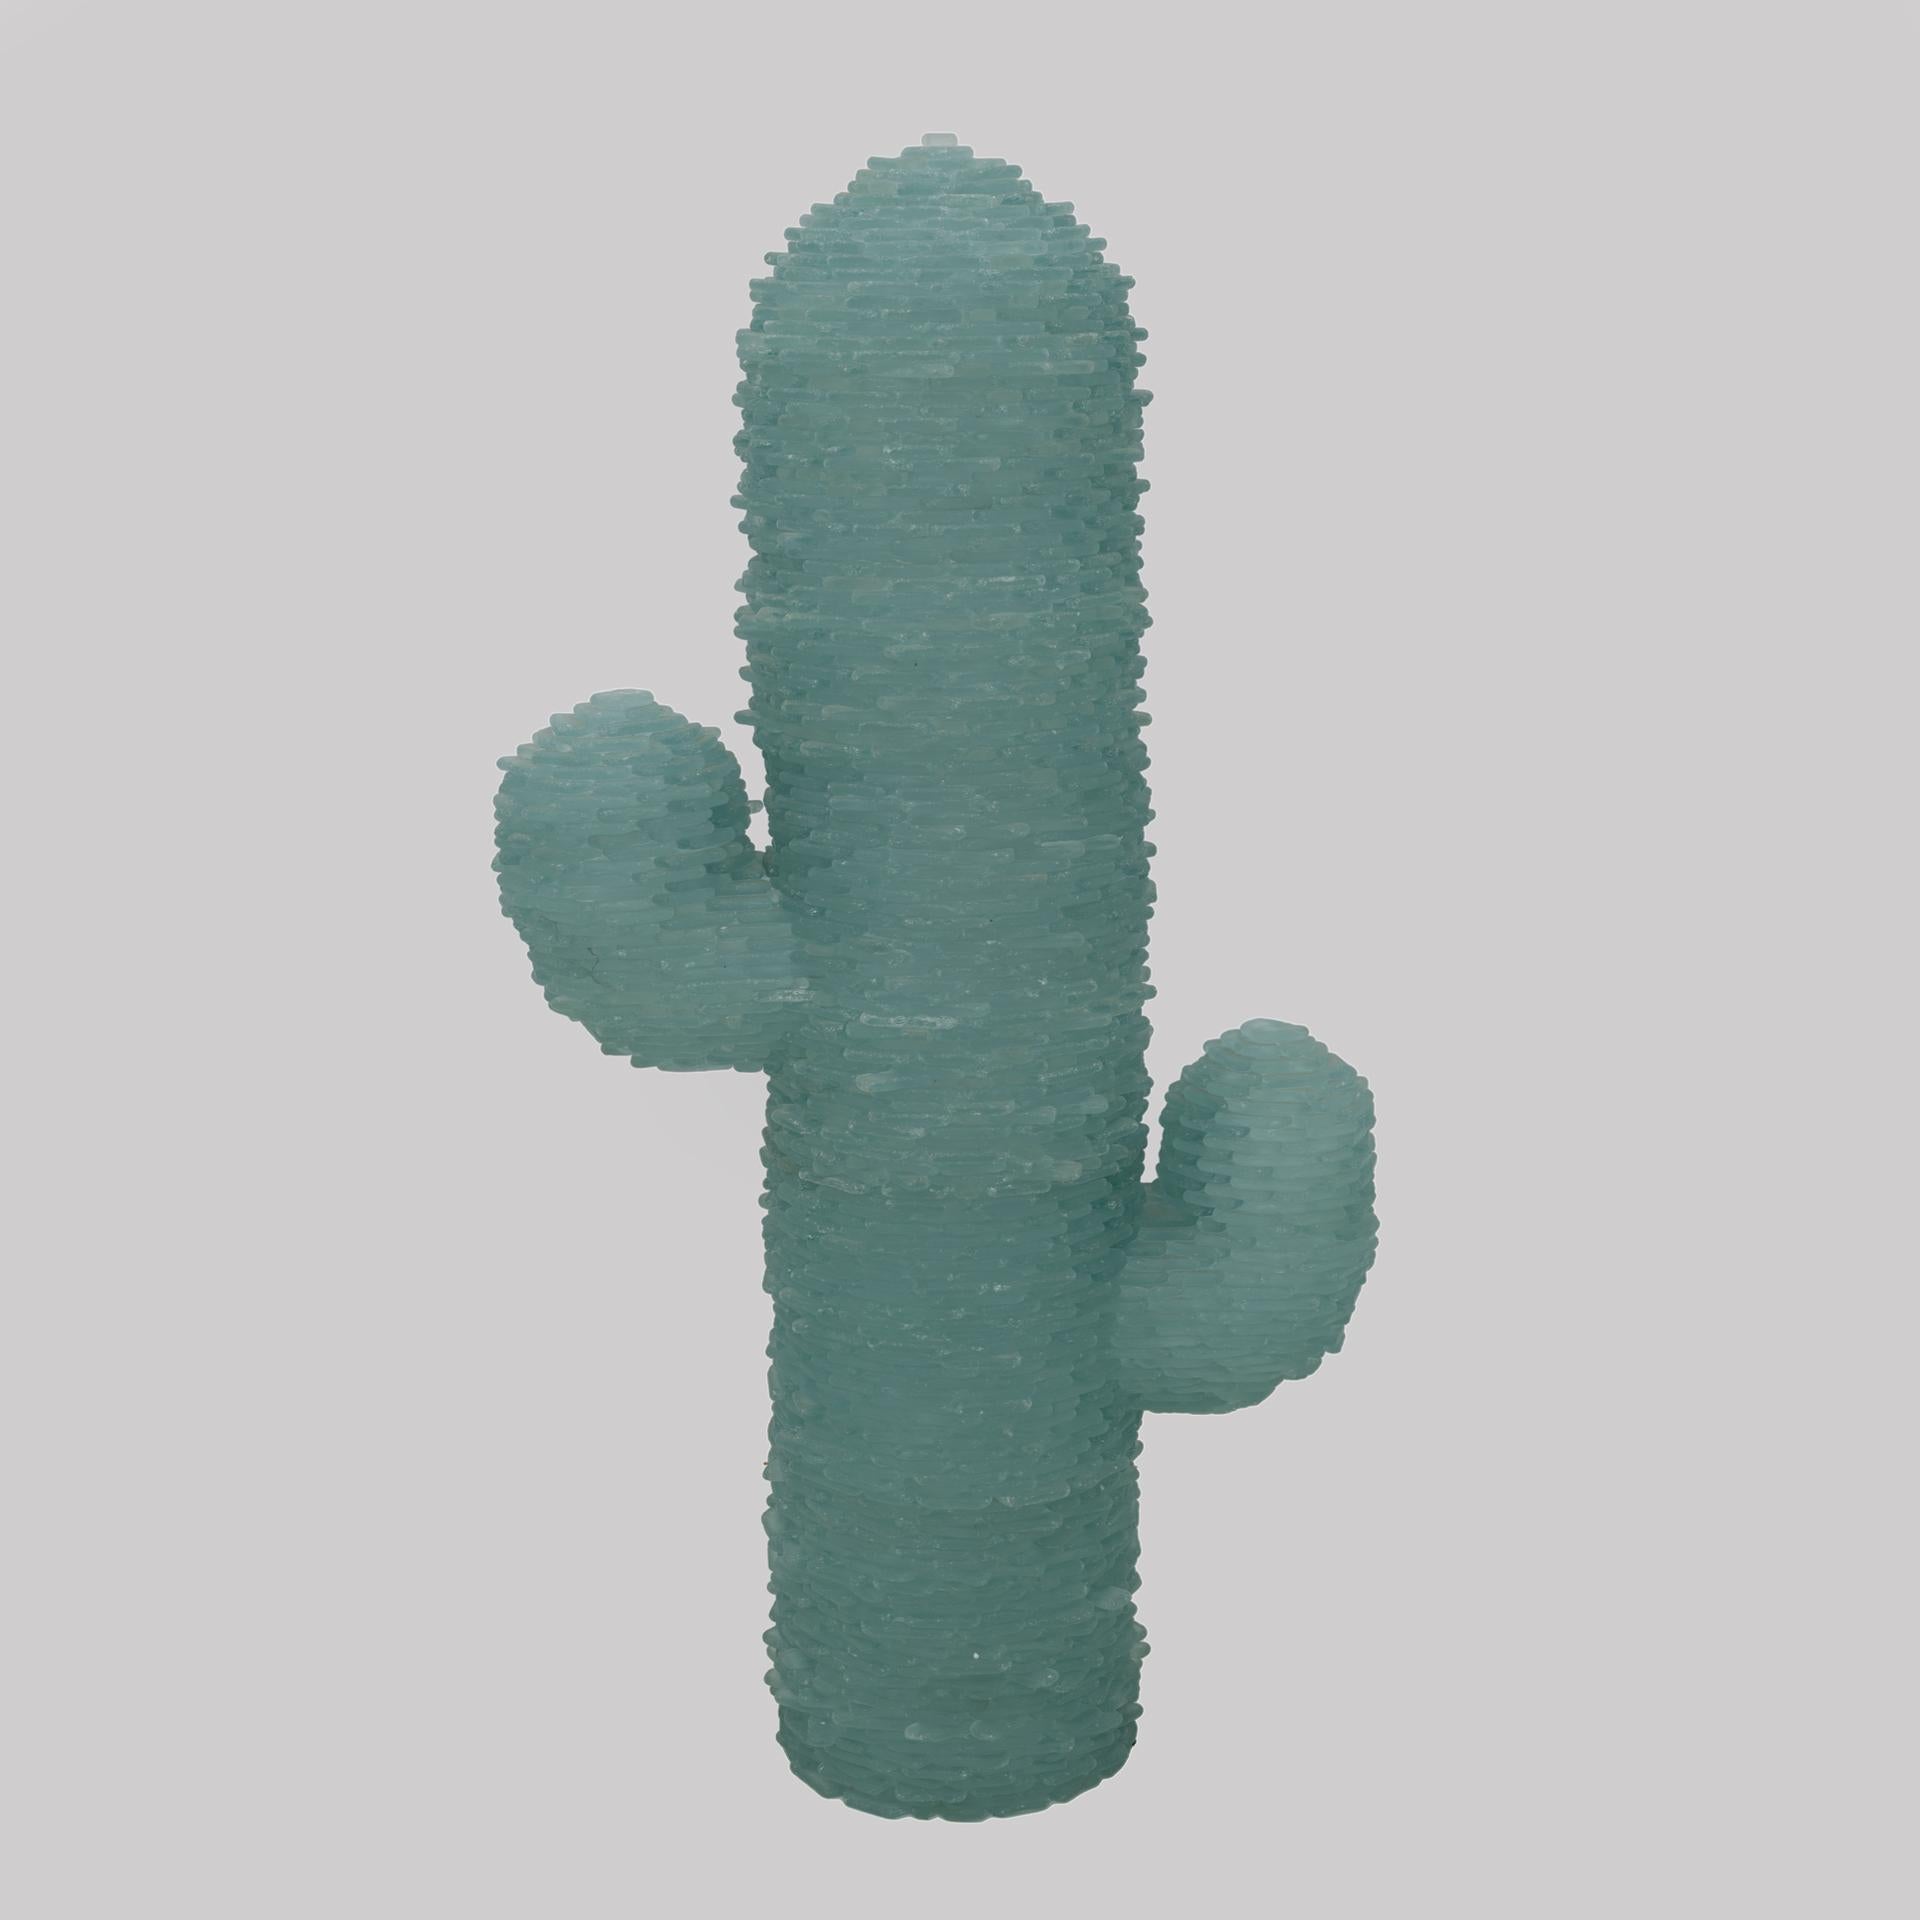 Splendid luminous sculpture entirely made of precious Murano glass sheets of a splendid aquamarine colour, attributed to Poliarte. More than a floor lamp, it is a cactus sculpture made up of small pieces of sea green Murano glass. It is made up of a